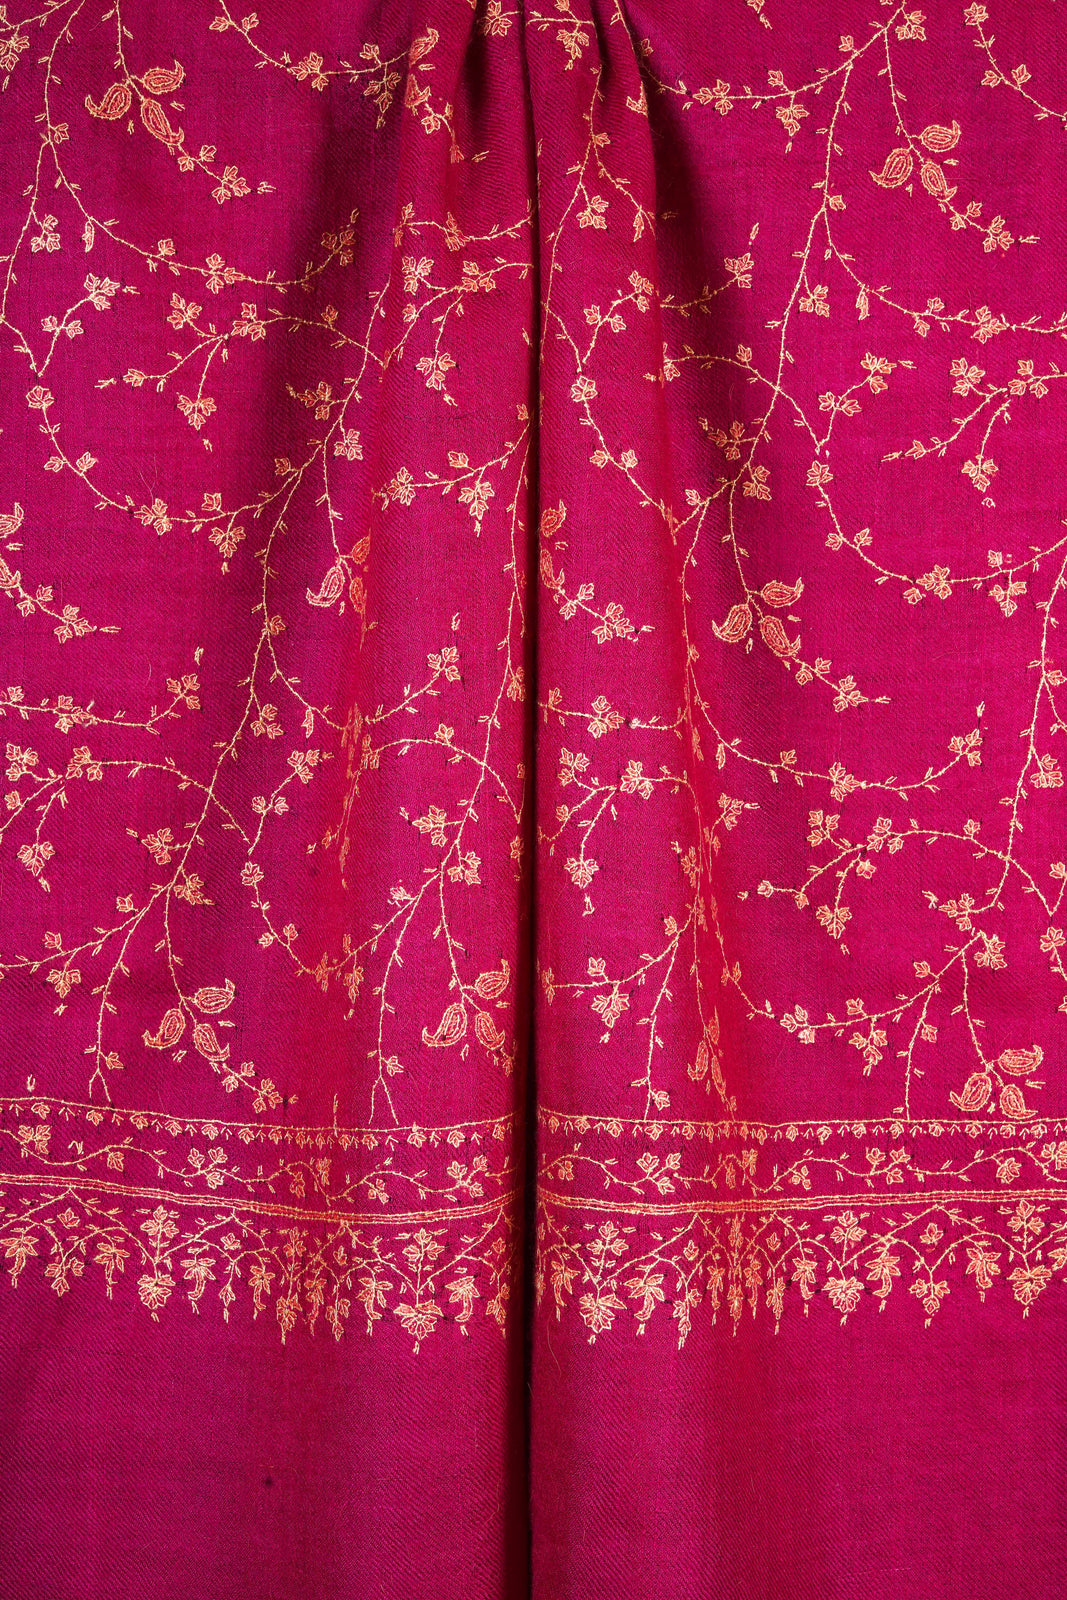 Pink Embroidery Cashmere Pashmina Scarf